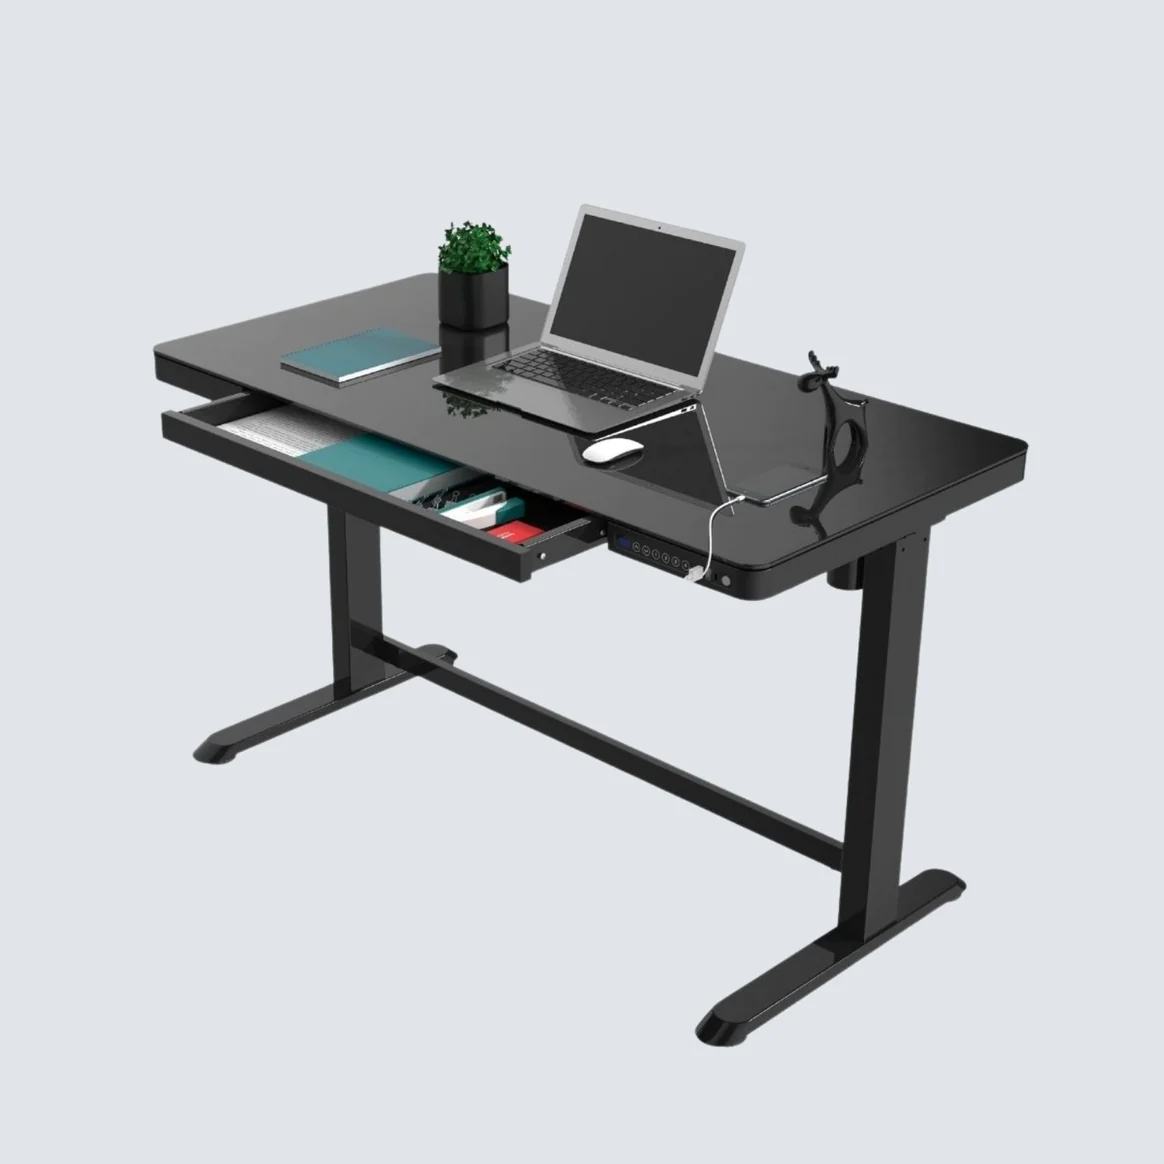 Stance’s Executive Glass Tabletop Single Motor Standing Desk